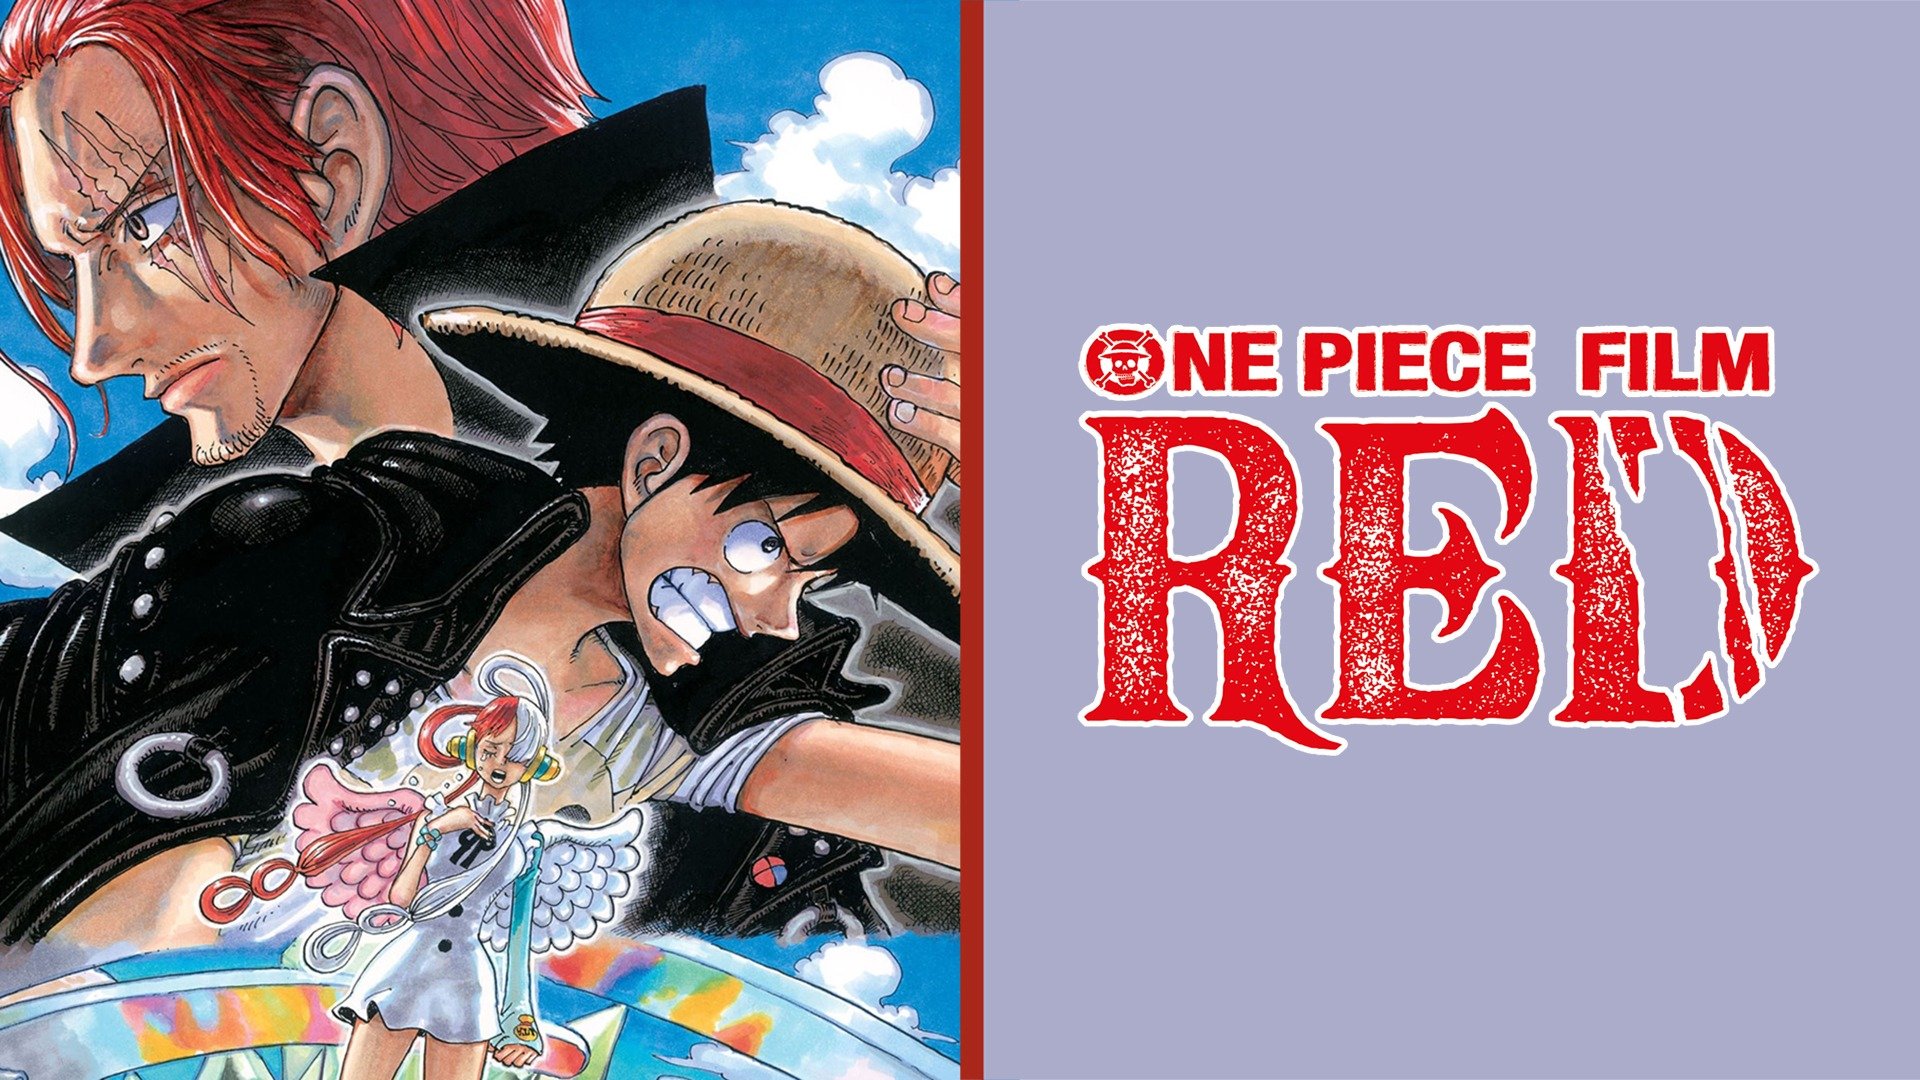 One Piece Film Red Anime Earns 15 Billion Yen After 46 Days  Anime India